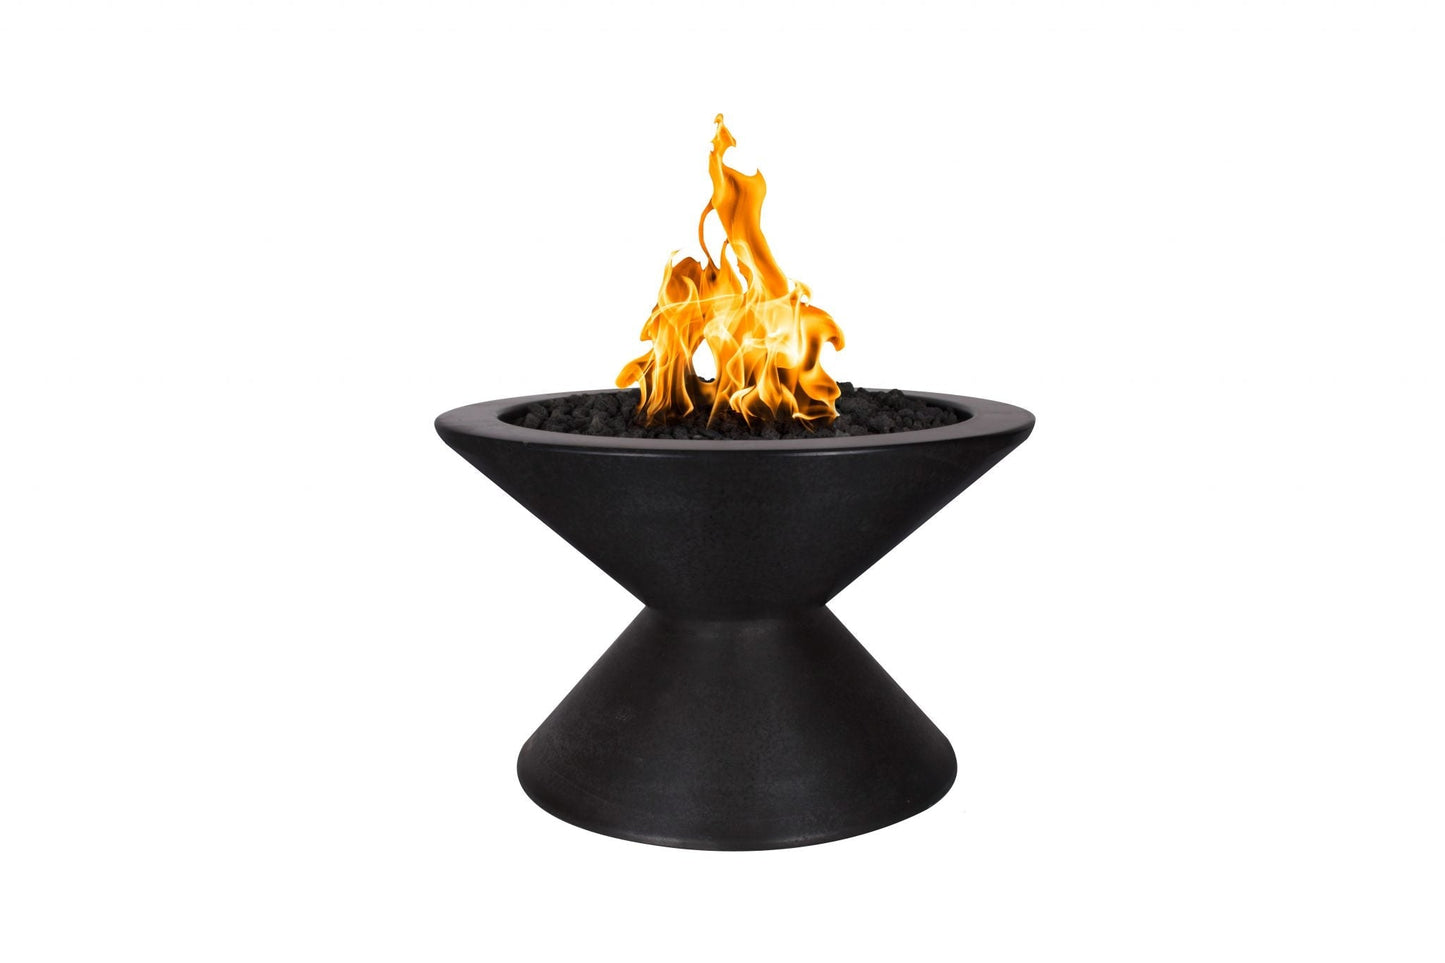 The Outdoor Plus Round Lucia 31" Metallic Silver GFRC Concrete Natural Gas Fire Pit with 110V Electronic Ignition